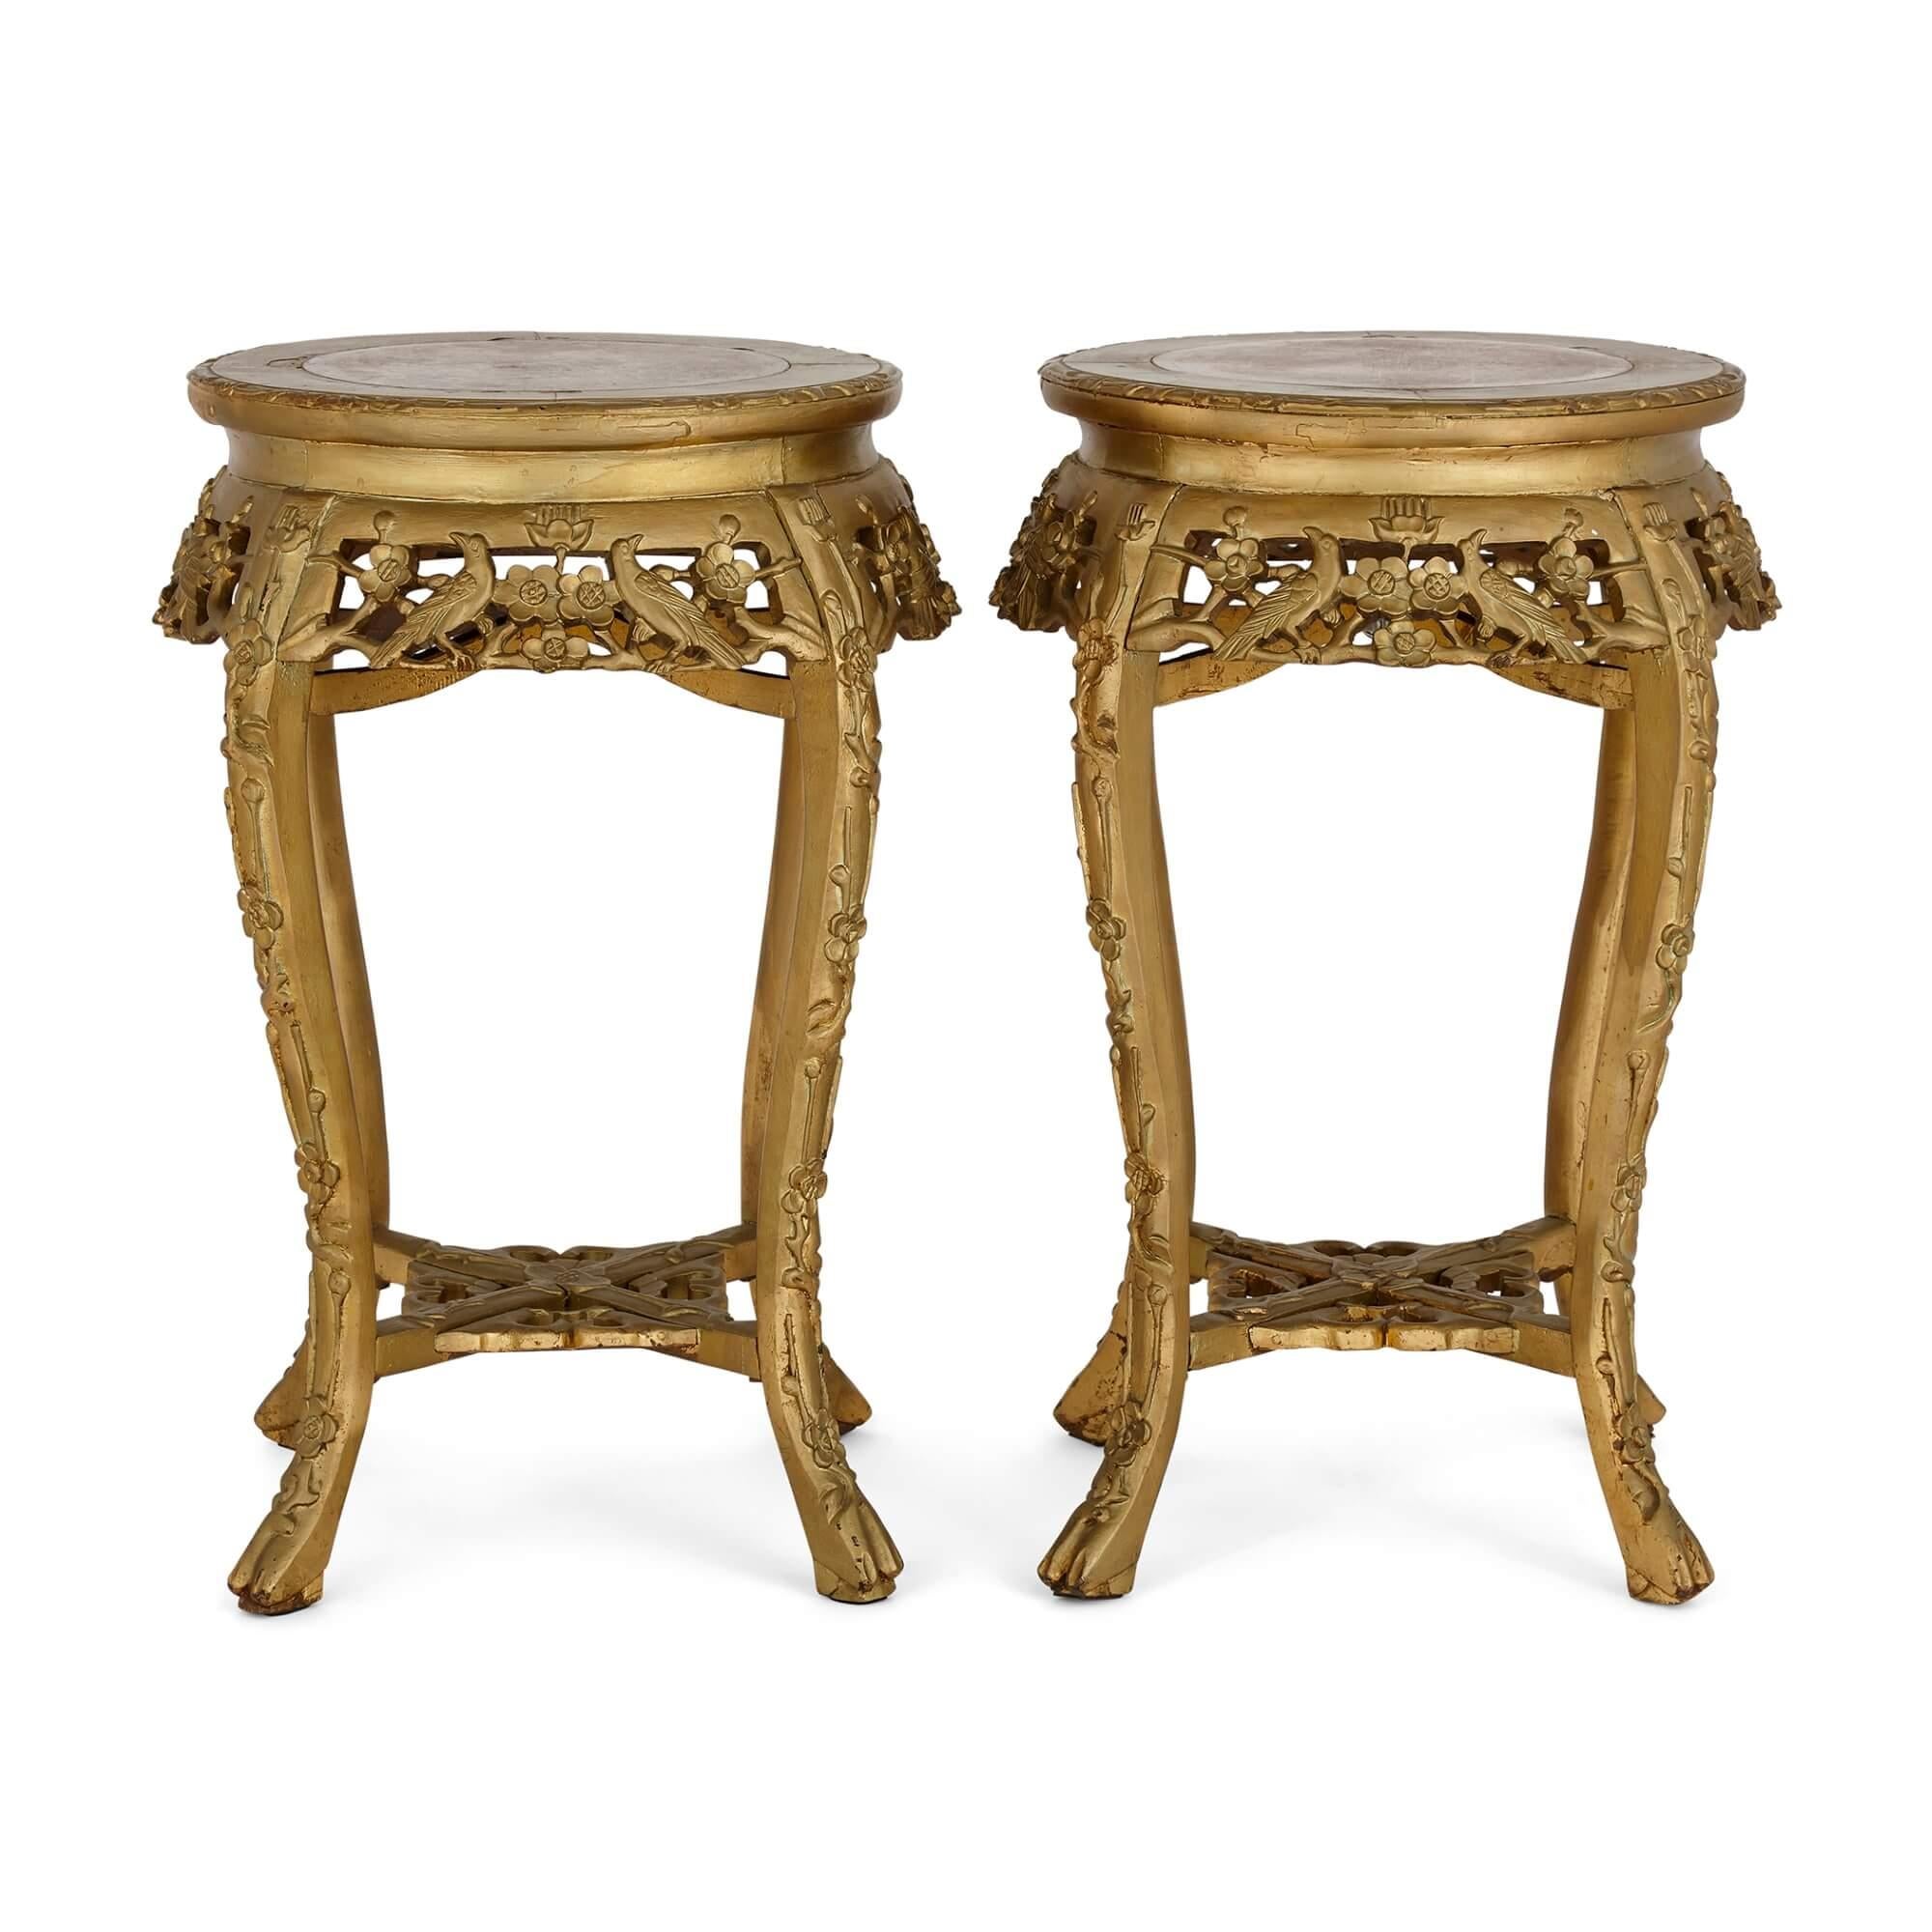 A pair of giltwood and marble-inlay stands
French, 20th century
Height 70cm, diameter 41cm

Made to complement and display luxury items such as Sevres style porcelain vases, these fine stands are French-made, and date from the early 20th